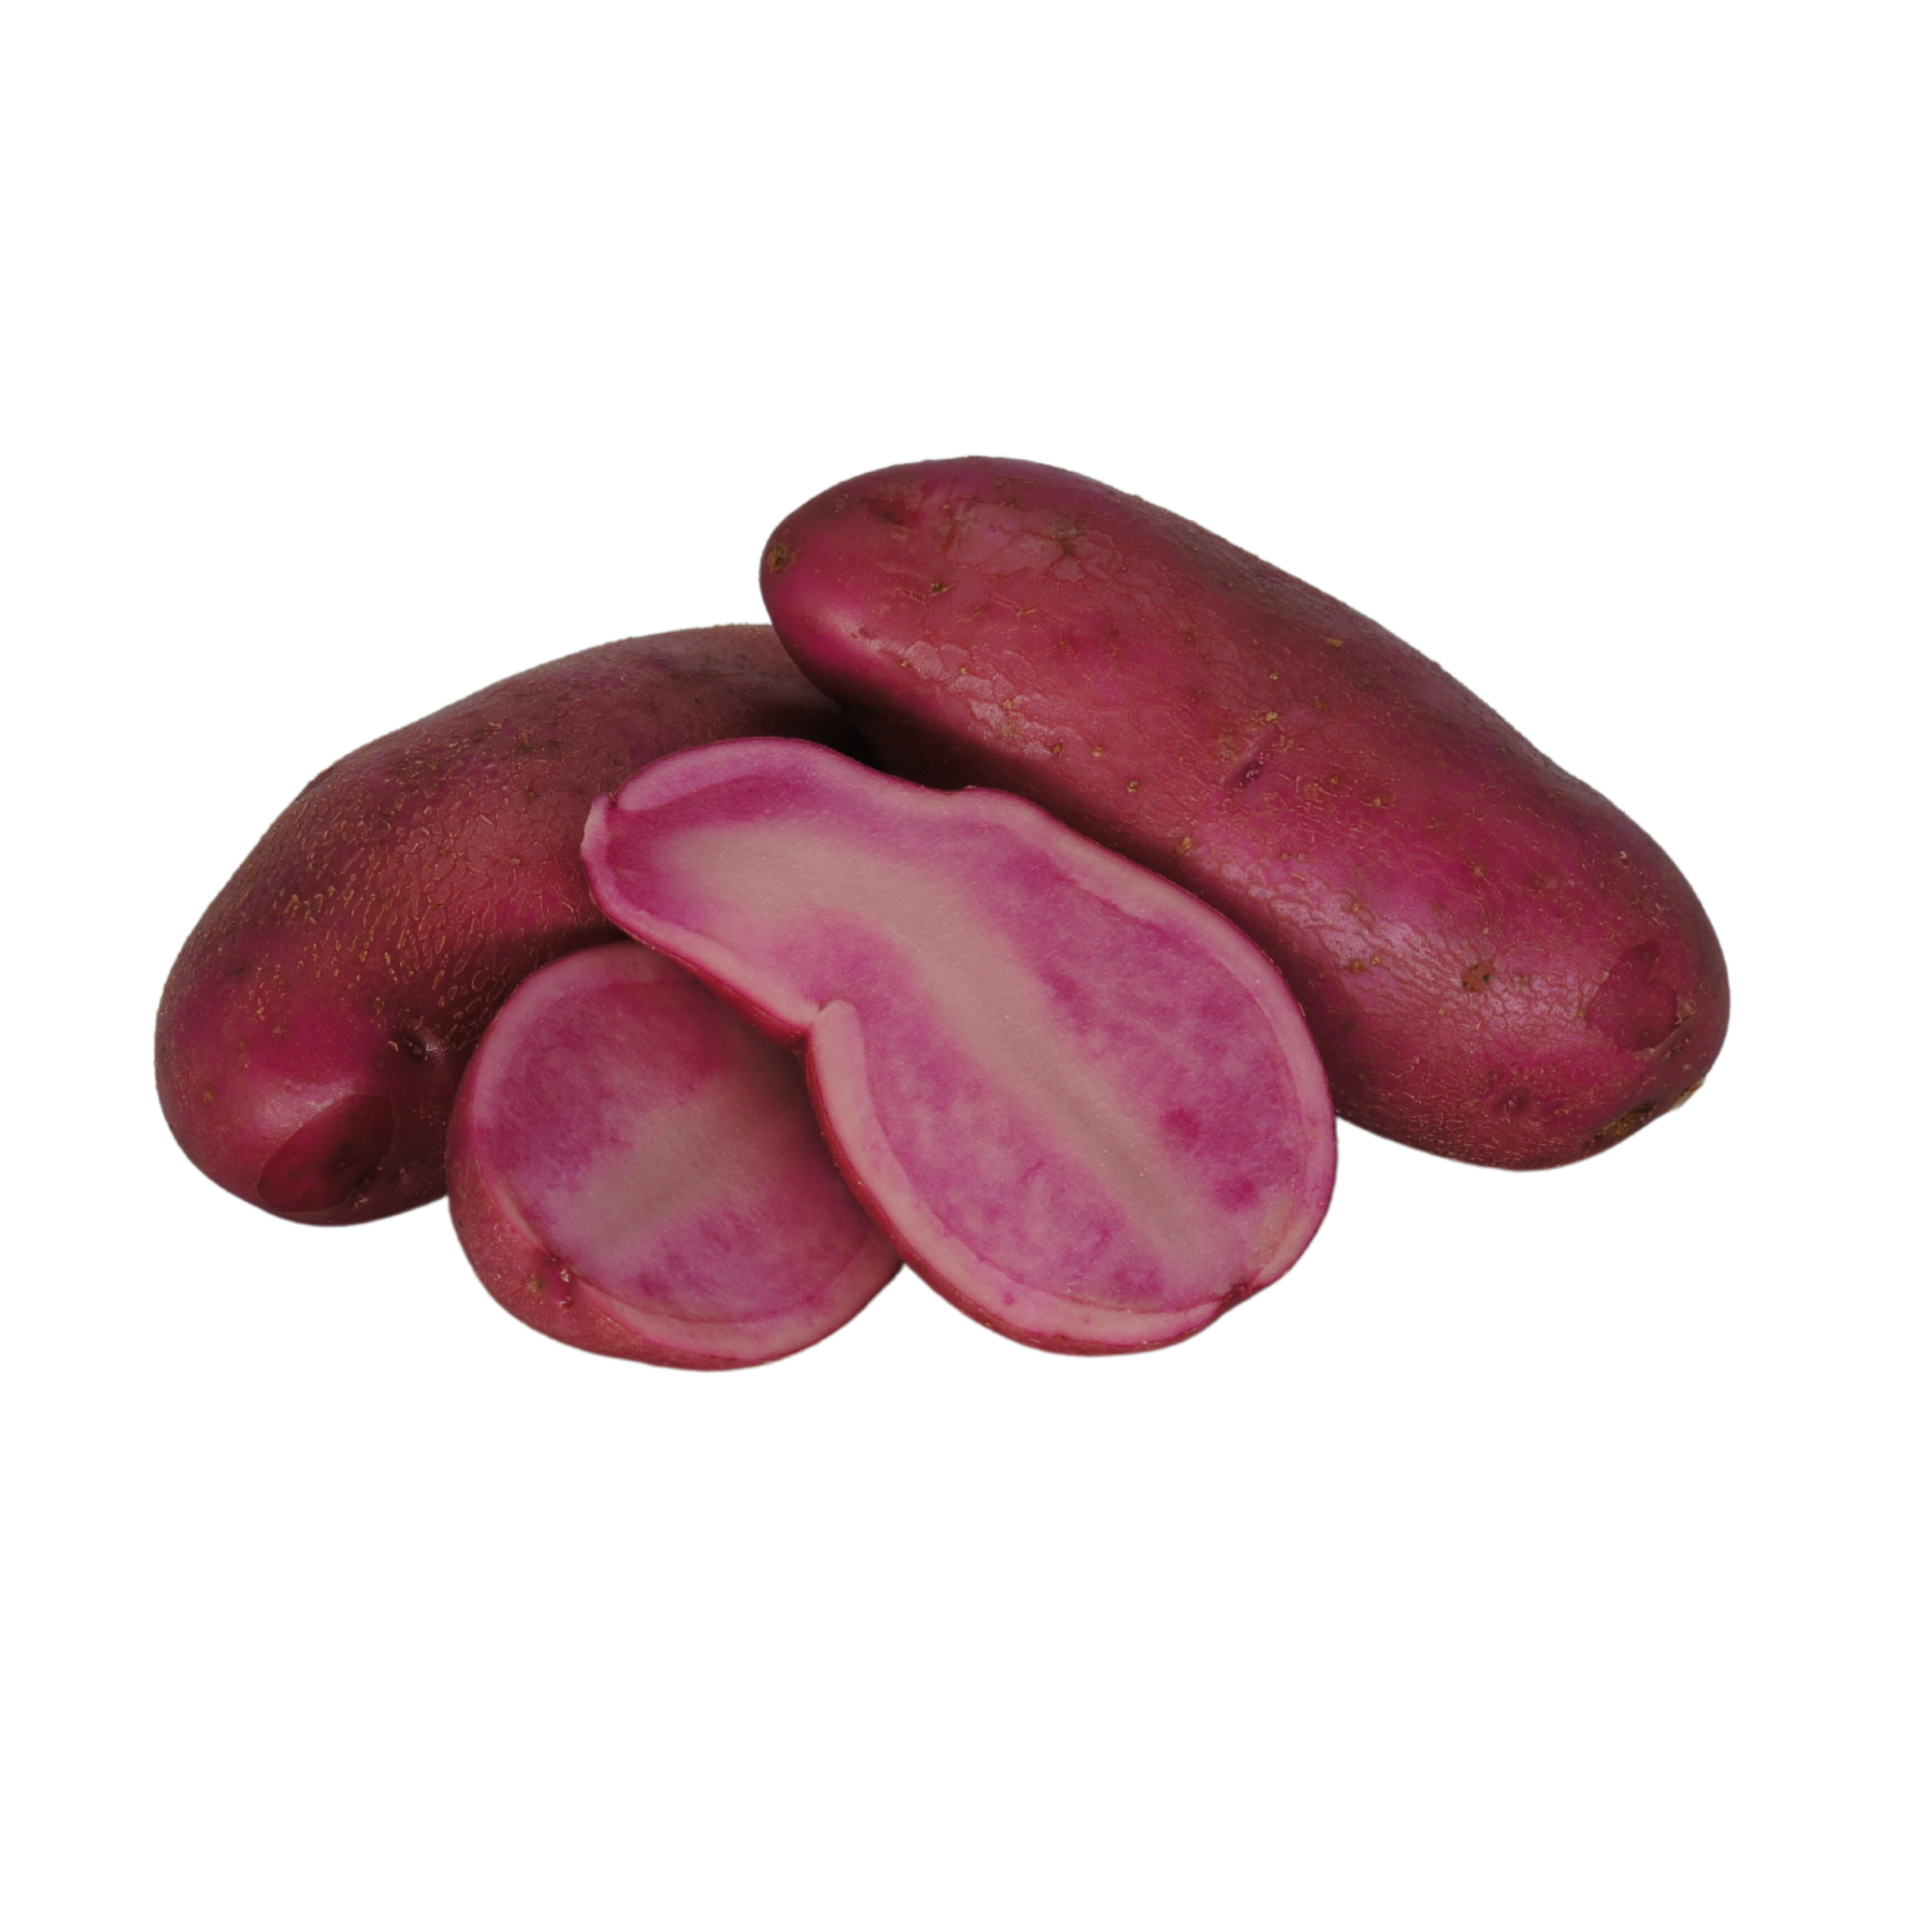 https://impro.usercontent.one/appid/oneComShop/domain/myexoticfruit.com/media/myexoticfruit.com/webshopmedia/Fresh%20delicious%20Red%20Emmalie%20potatoes%20ready%20to%20buy%20along%20with%20lots%20of%20other%20delectable%20potato%20varieties%20from%20myexoticfruit-1665602879008.png?&withoutEnlargement&resize=1920+9999